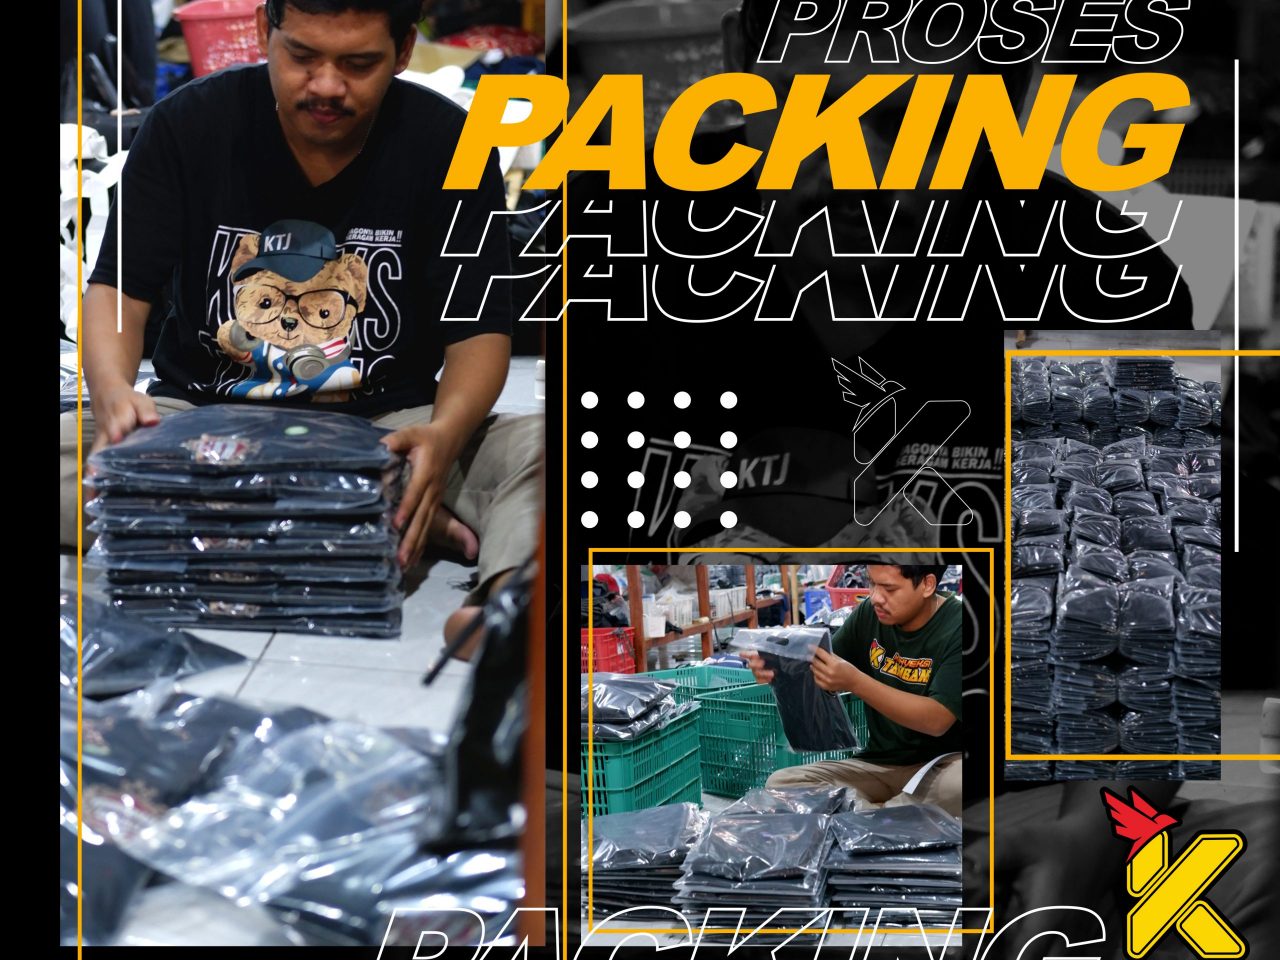 Proses Packing dan Quality Control